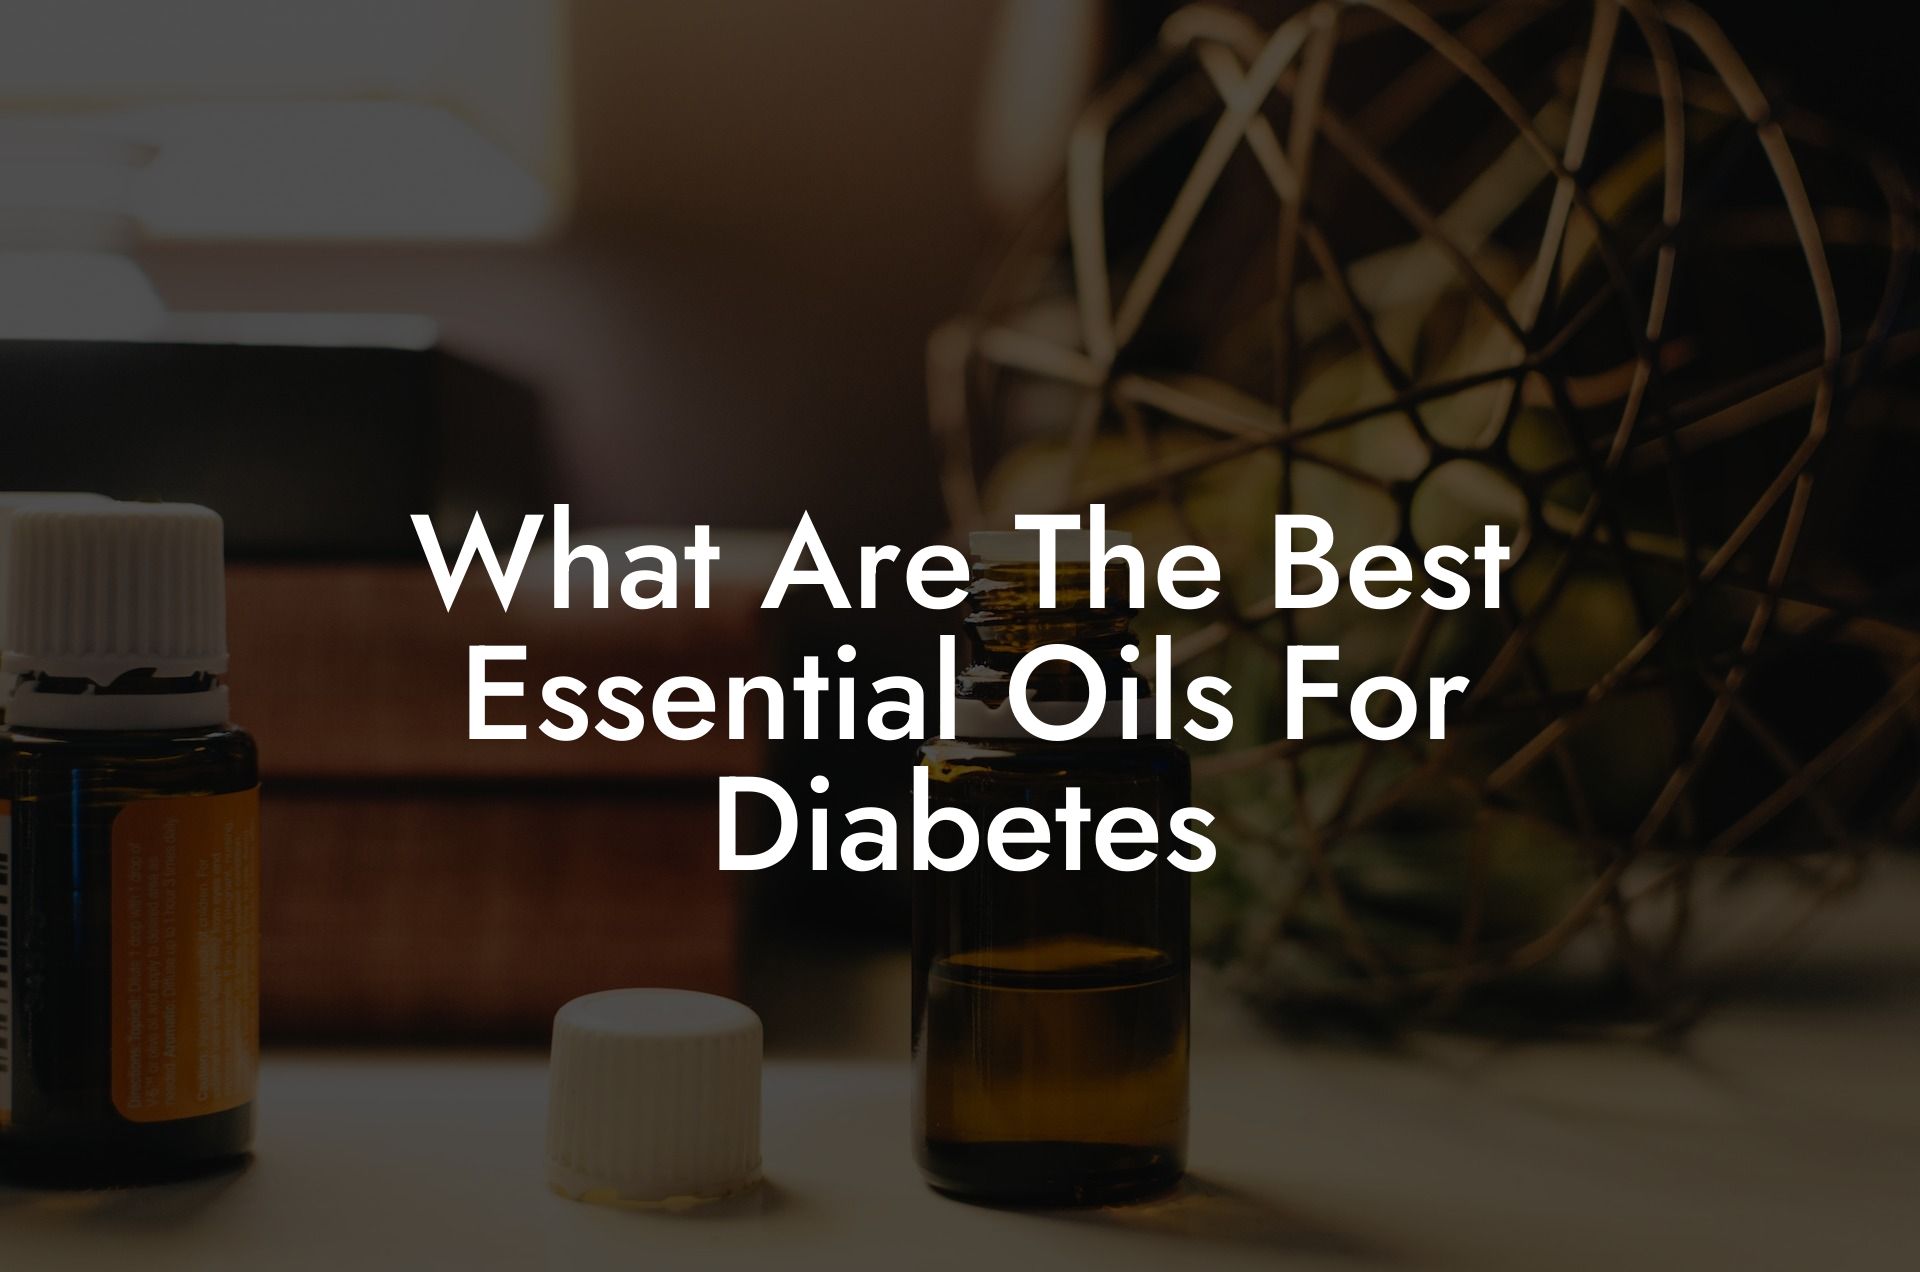 What Are The Best Essential Oils For Diabetes